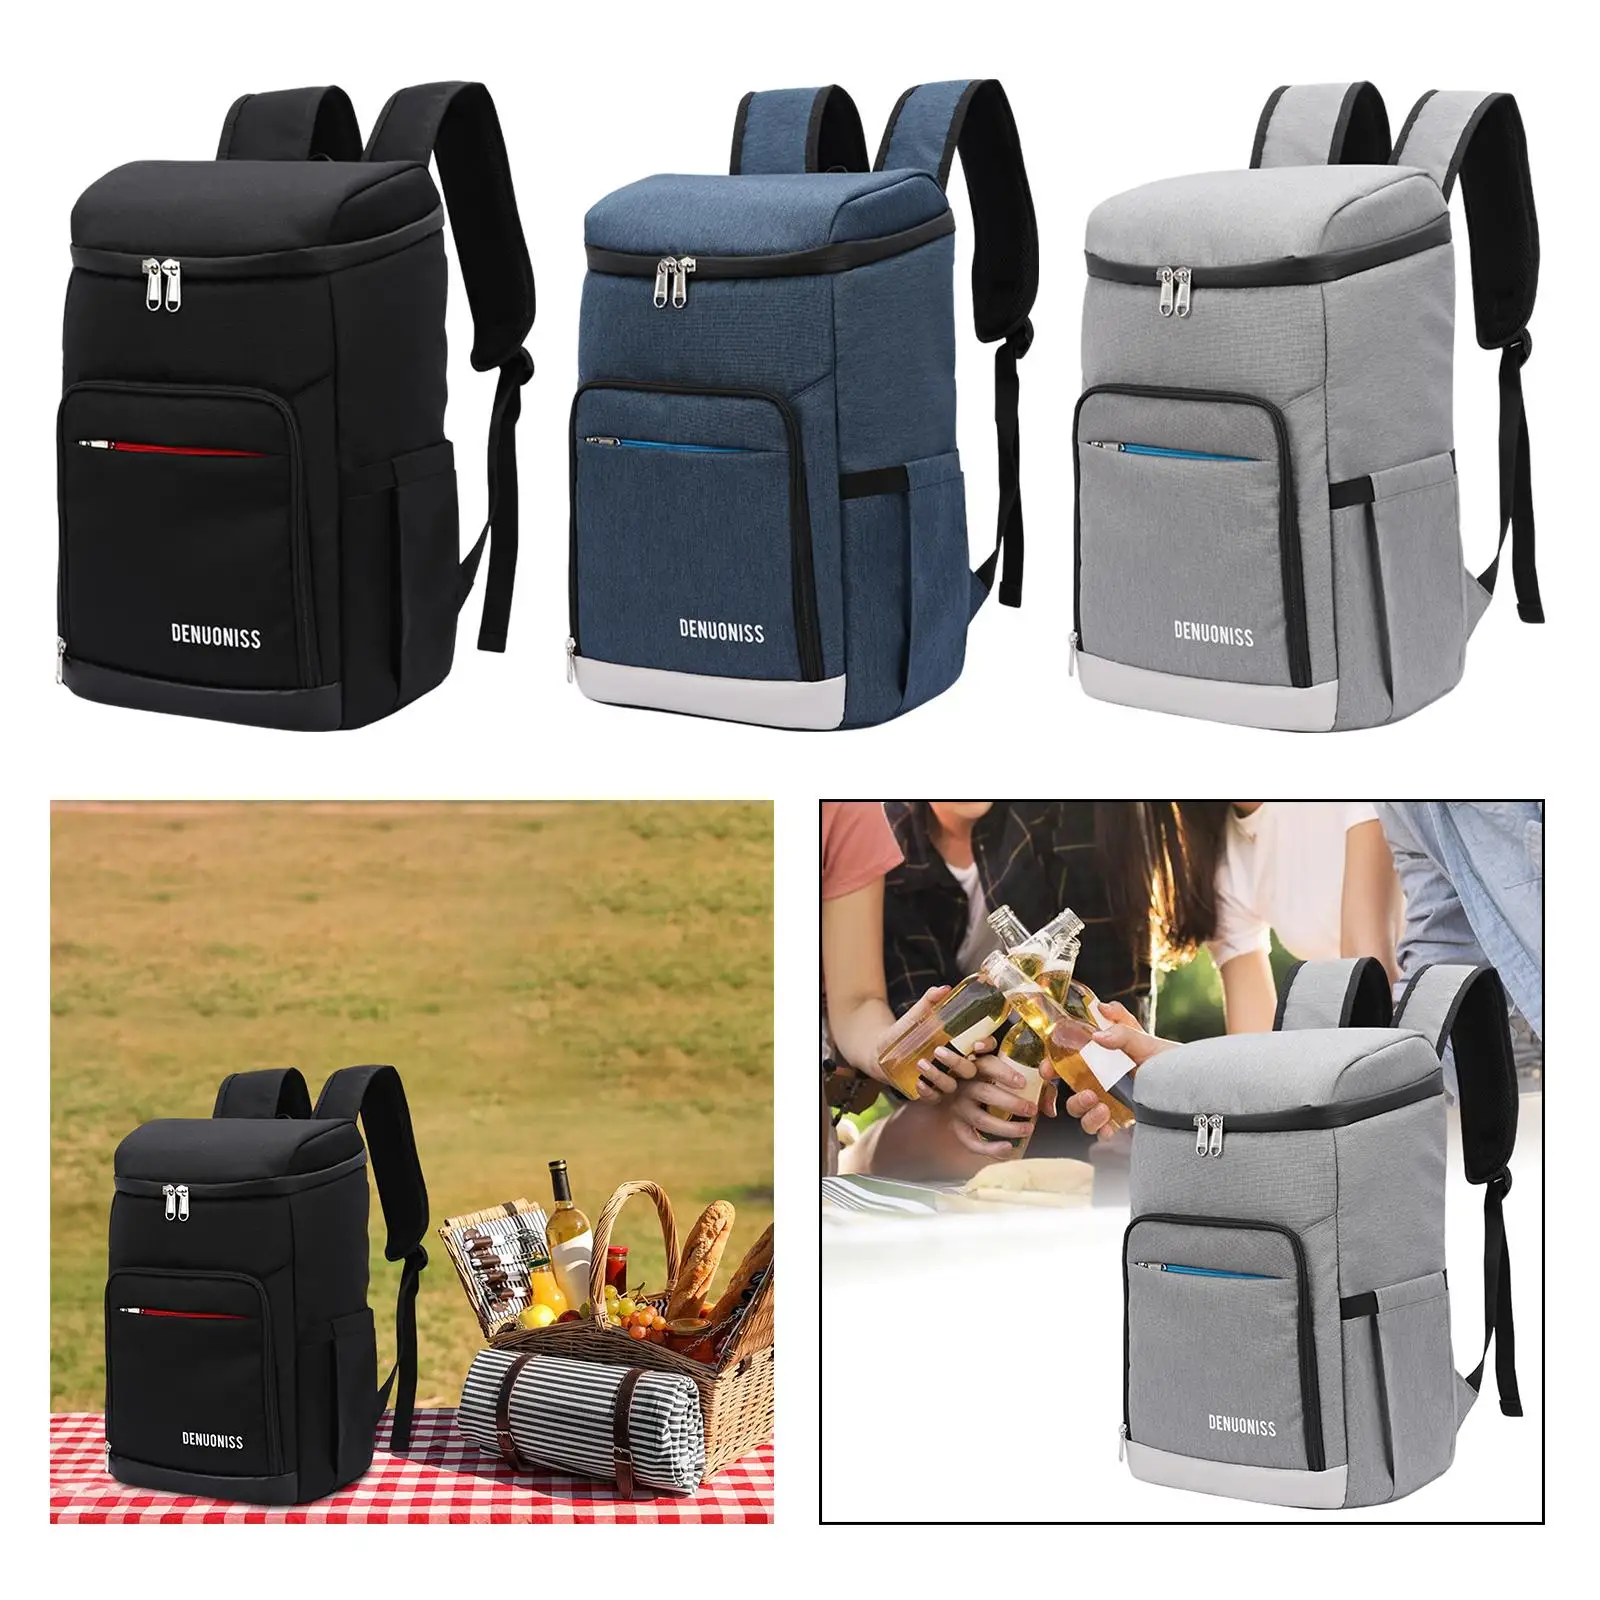 Outdoor Picnic Bag Insulated Backpack for Picnic Hiking Camping Beach